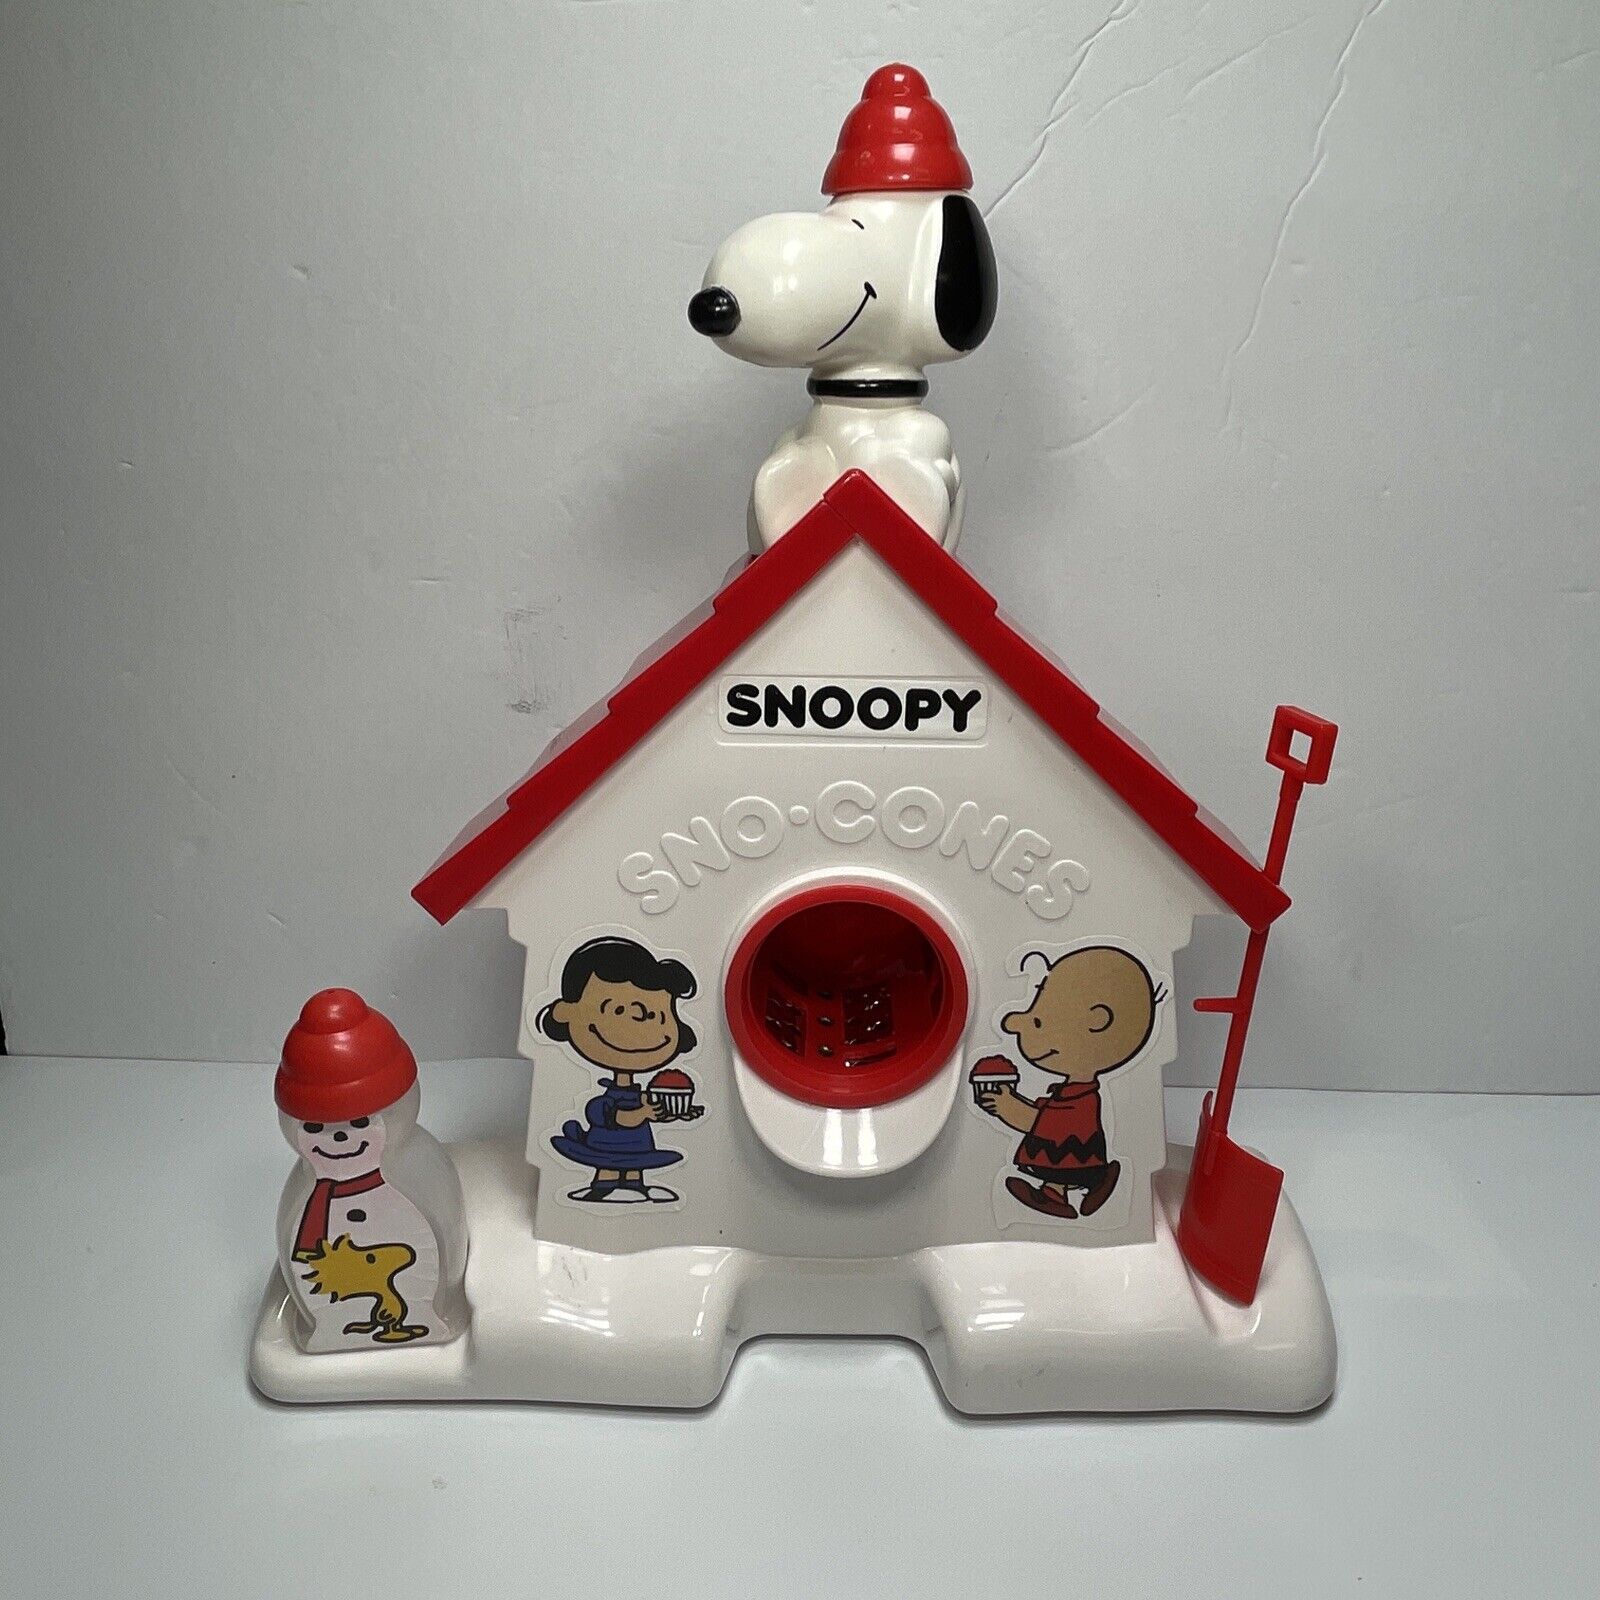 VTG 1980’s Snoopy Snow Cone Machine Peanuts Charlie Brown Cra-Z-Art Shave Ice